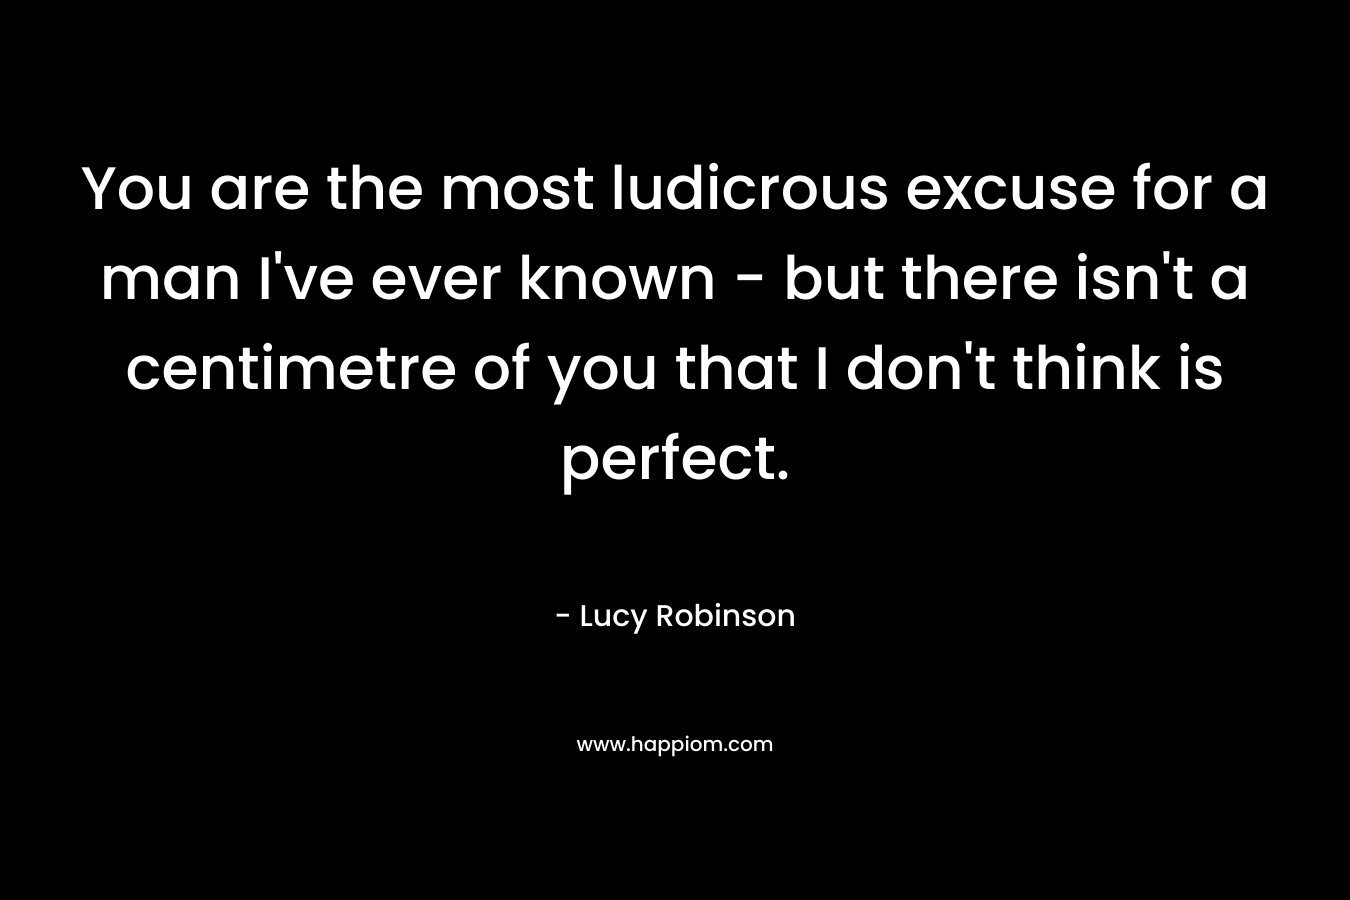 You are the most ludicrous excuse for a man I’ve ever known – but there isn’t a centimetre of you that I don’t think is perfect. – Lucy Robinson